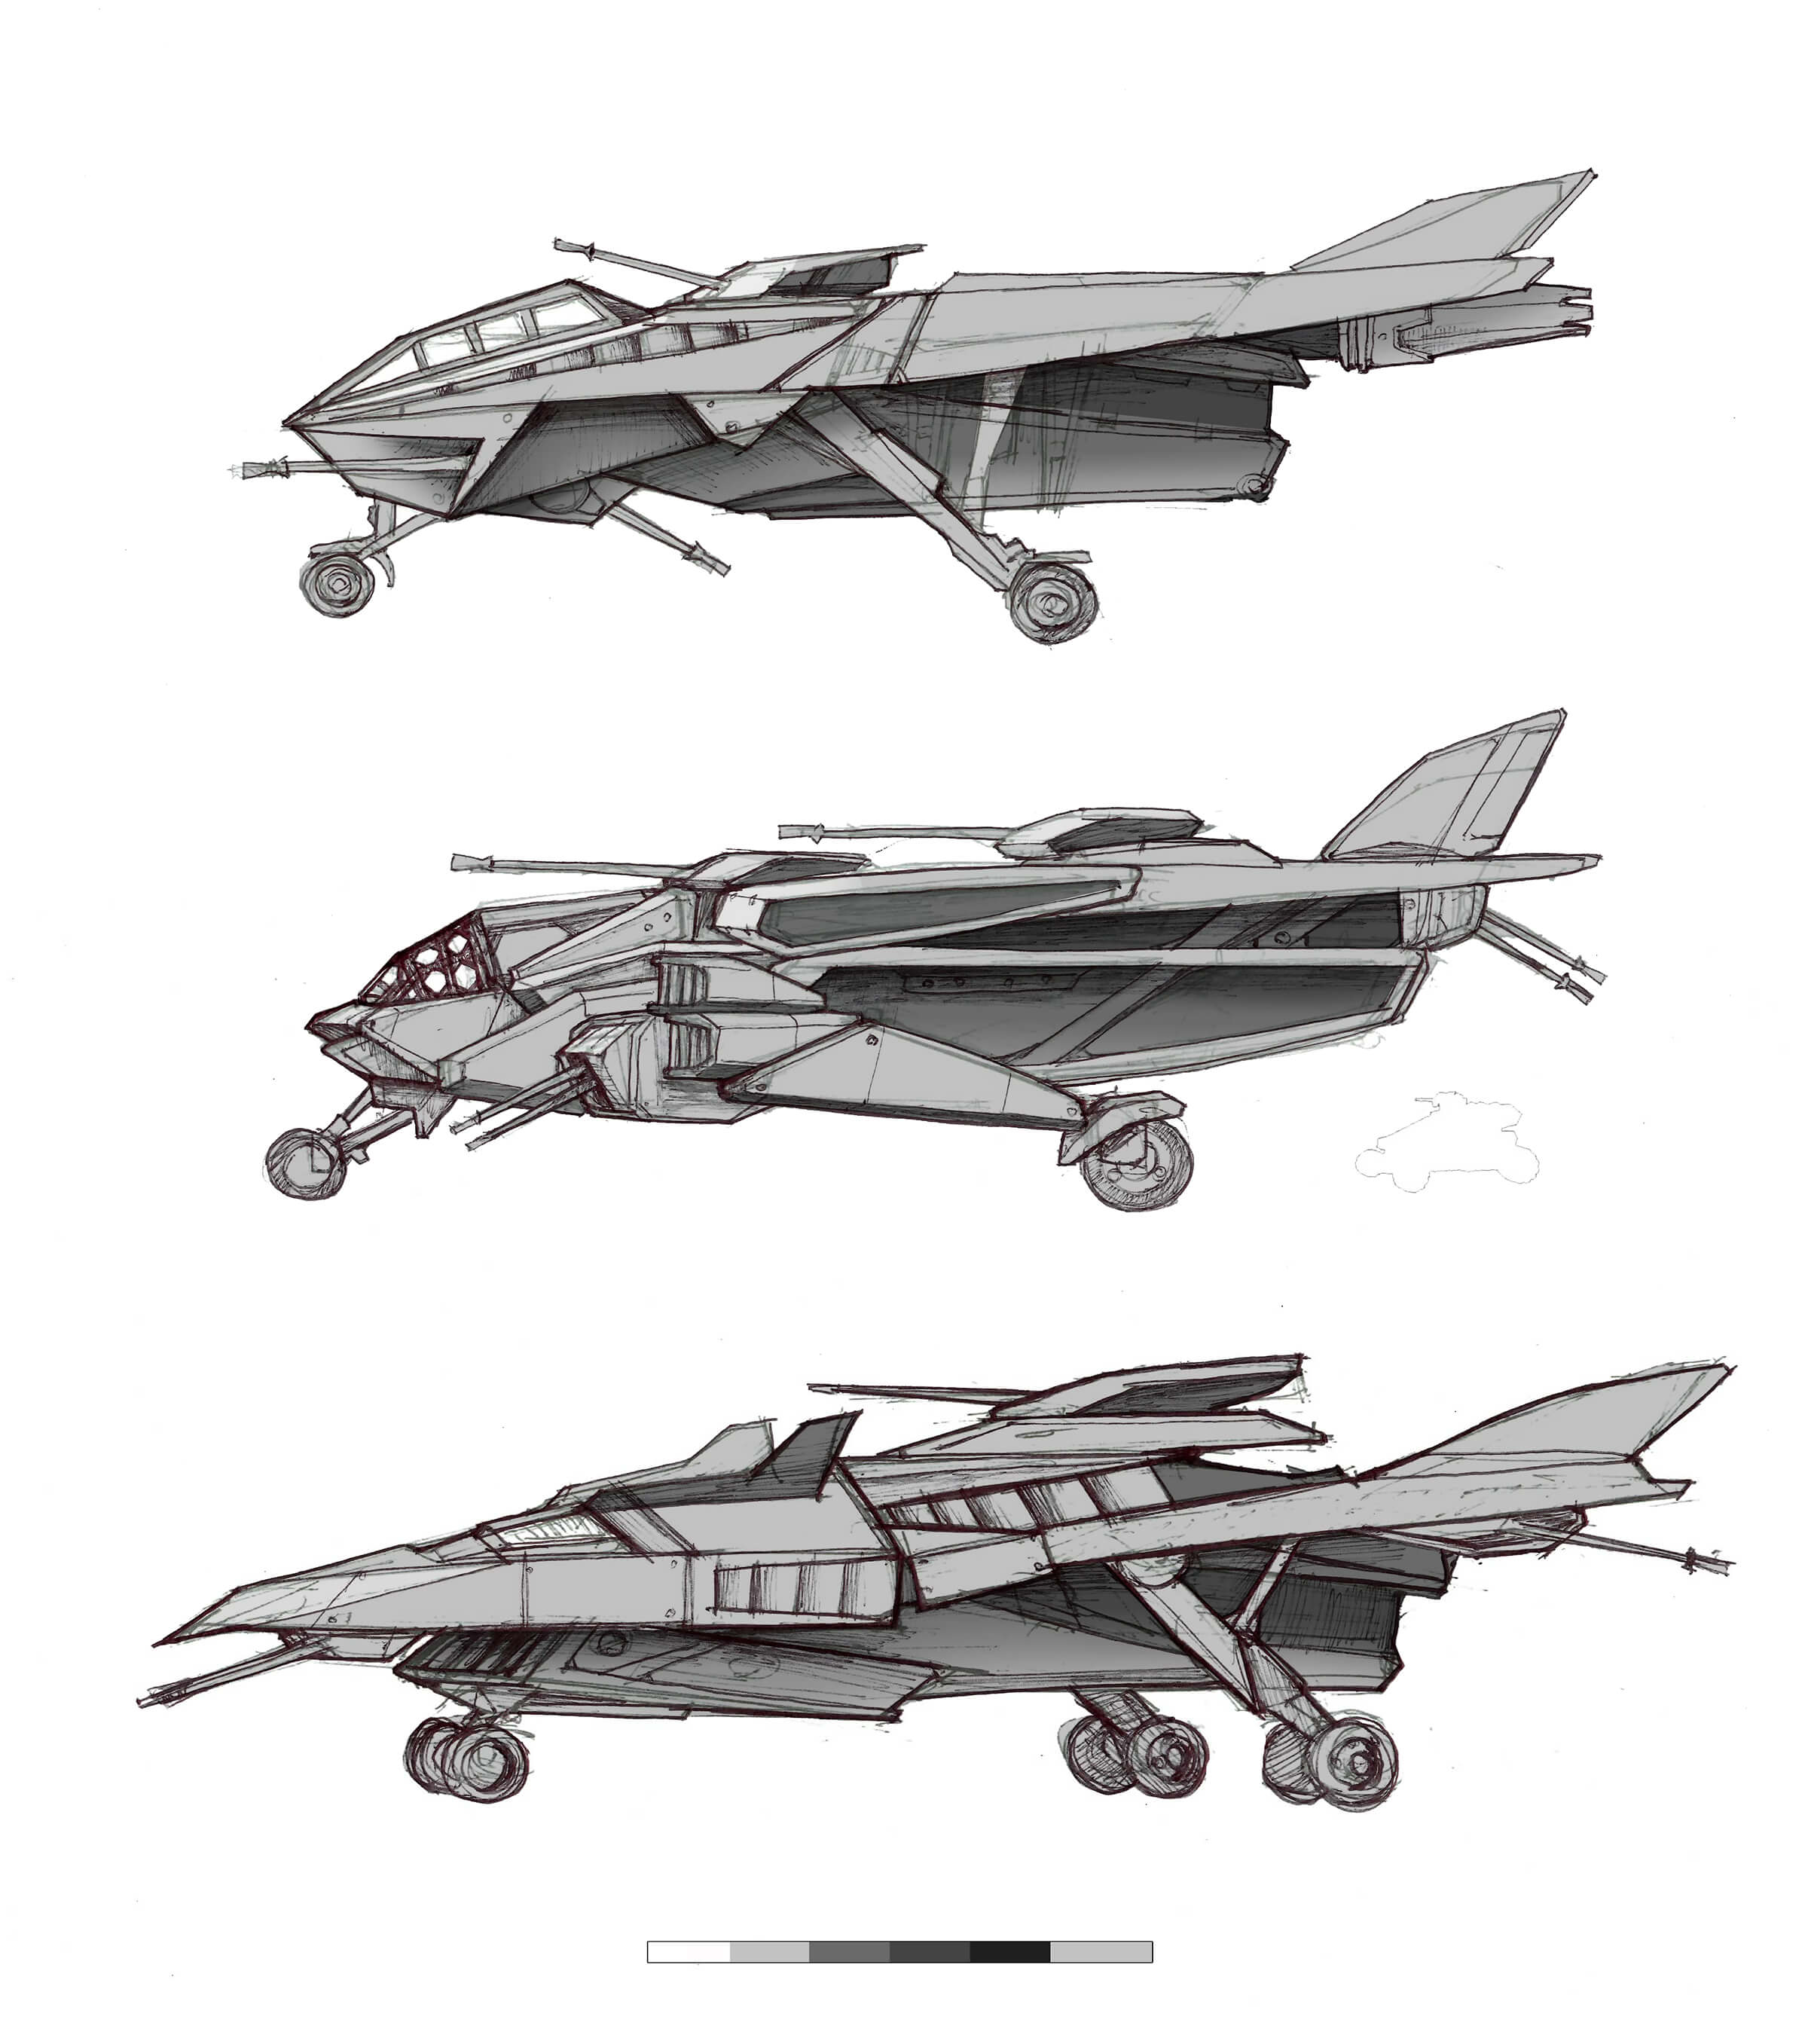 A sketched military aircraft